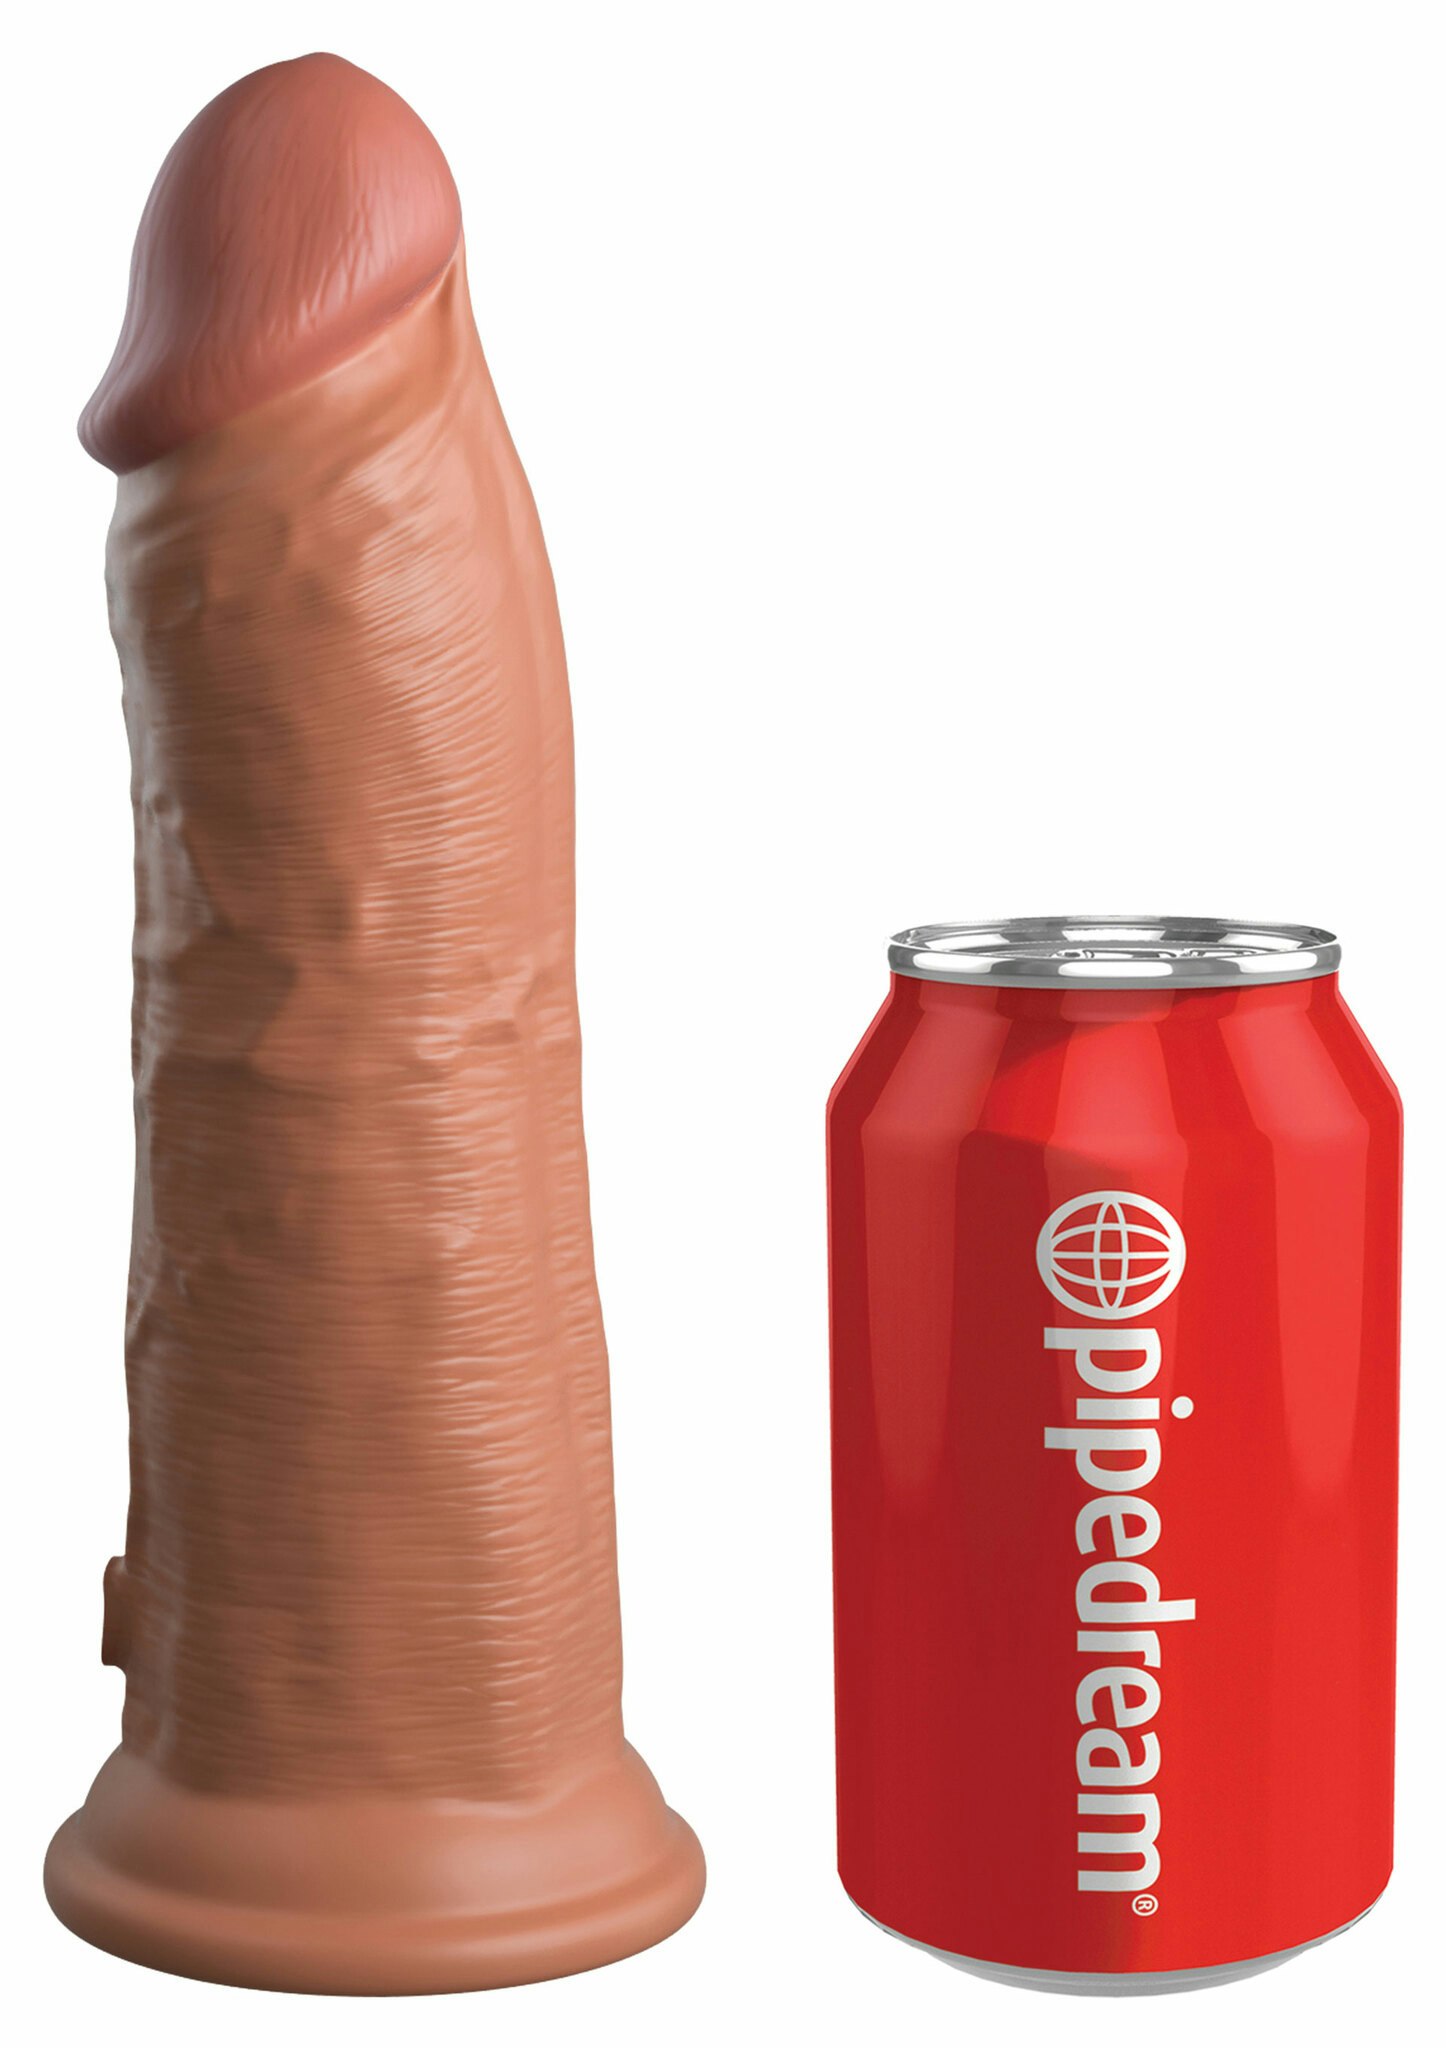 King Cock - Dual Density Silicone Vibe Cock 8 inch